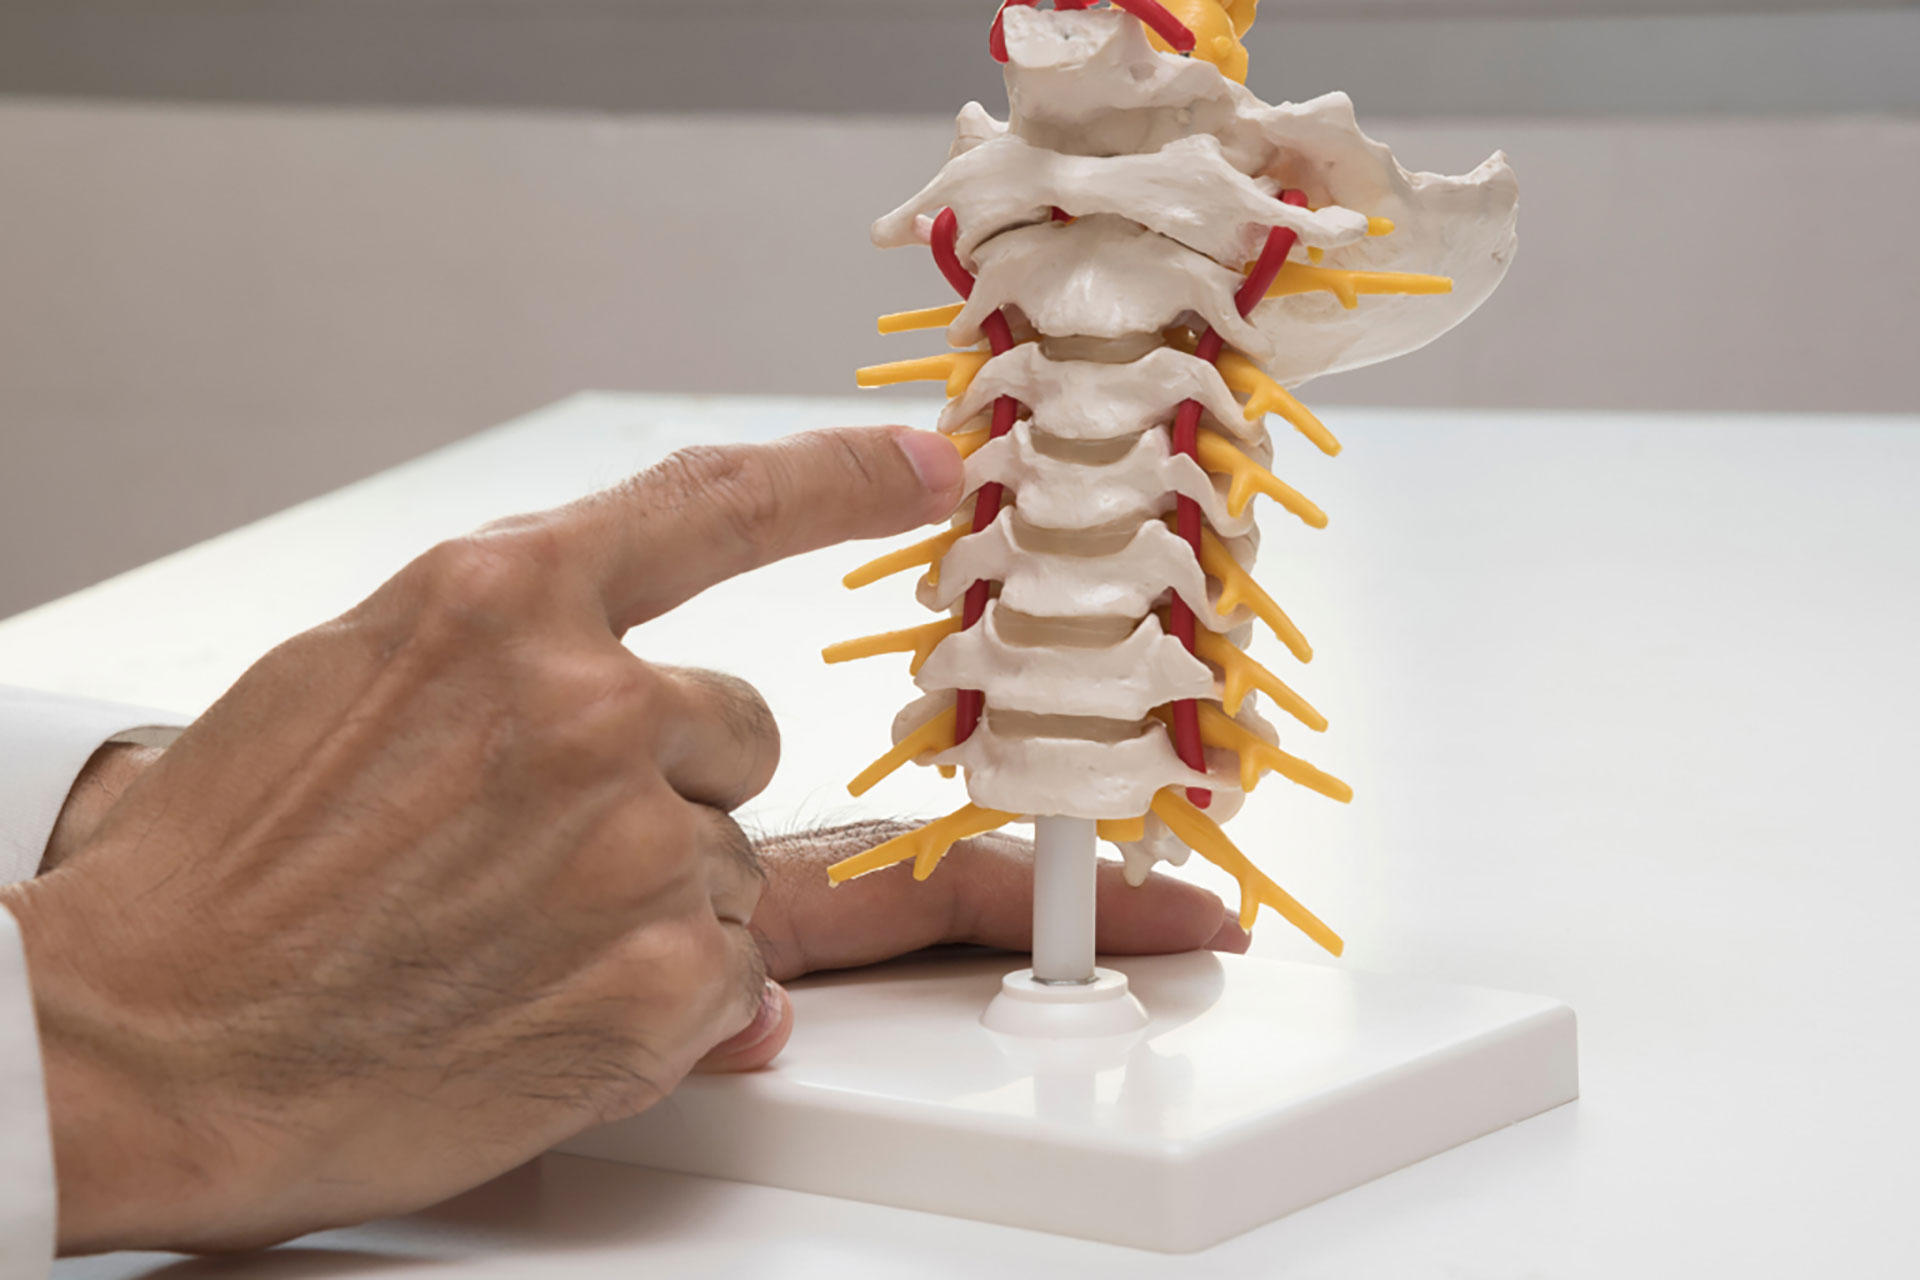 What are the common causes of back pain?